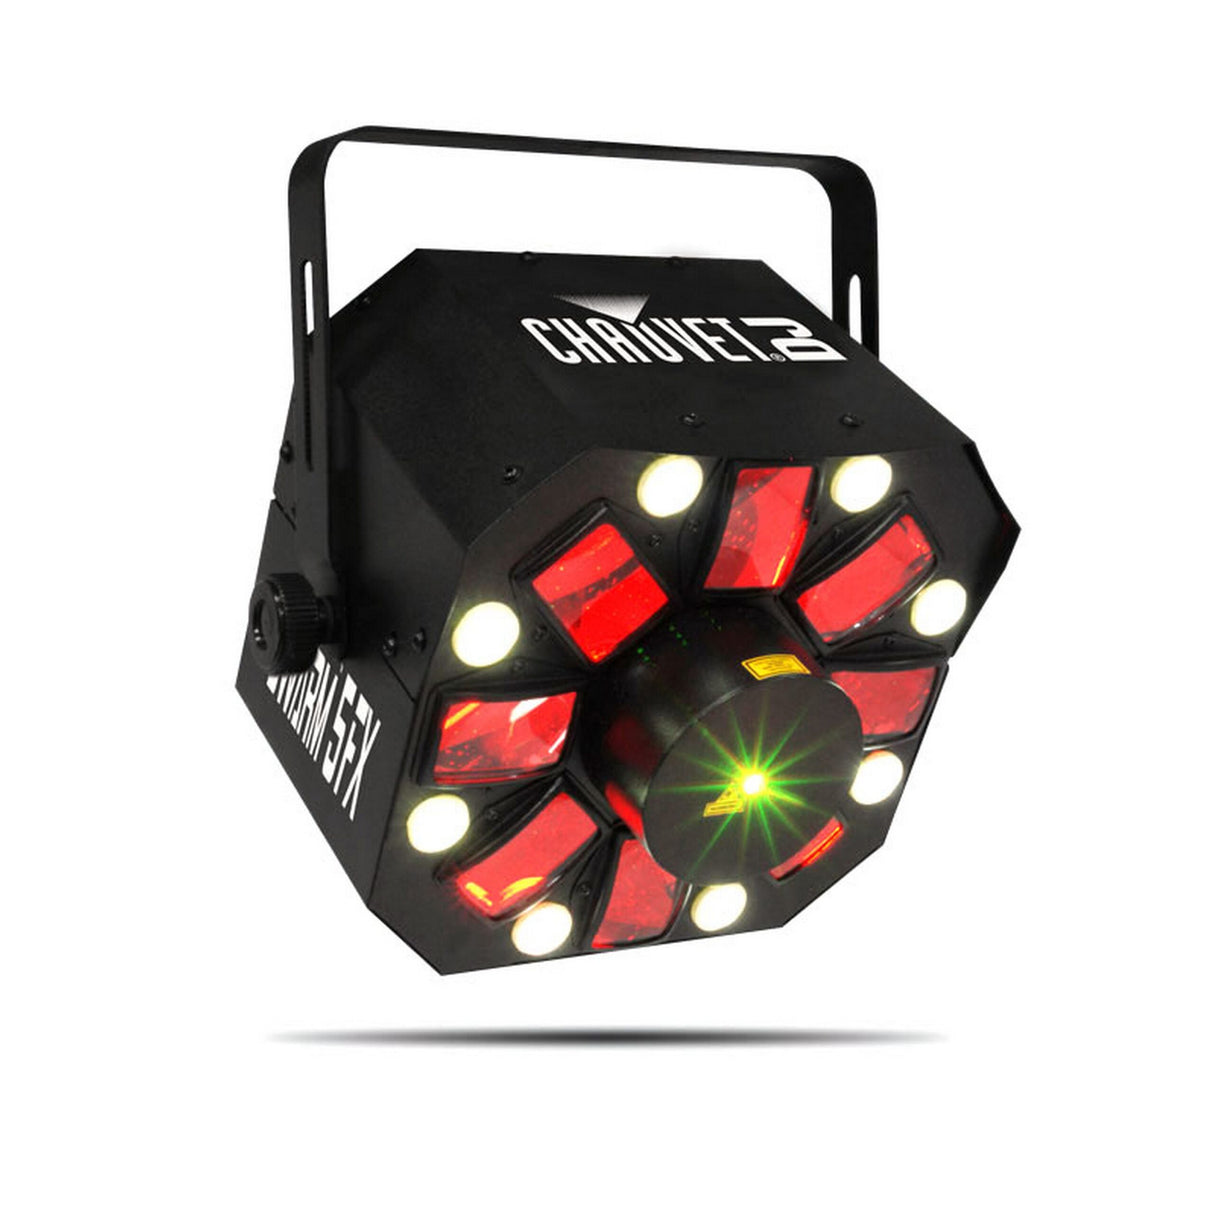 Chauvet Swarm 5 FX 3-in-1 LED and Laser Effects Fixture